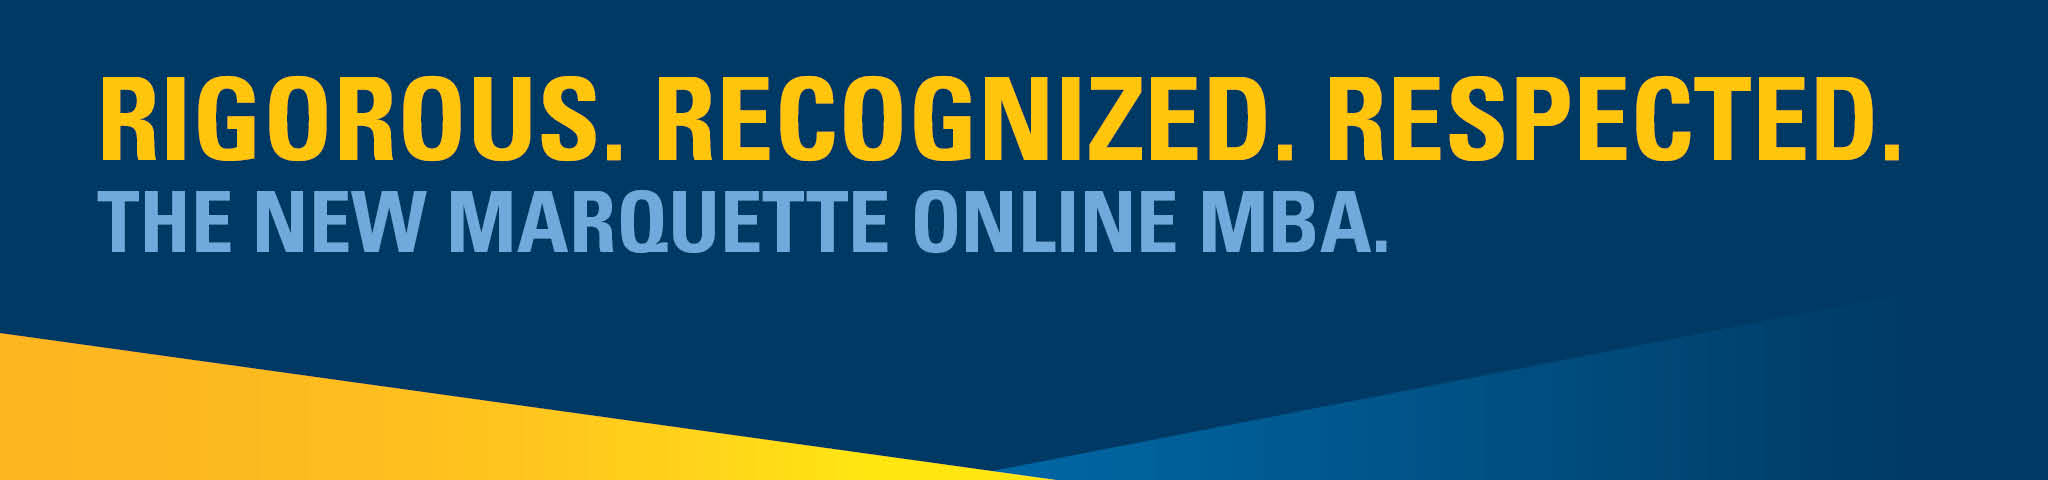 Rigorous, Recognized, Respected.  The new Marquette Online MBA.